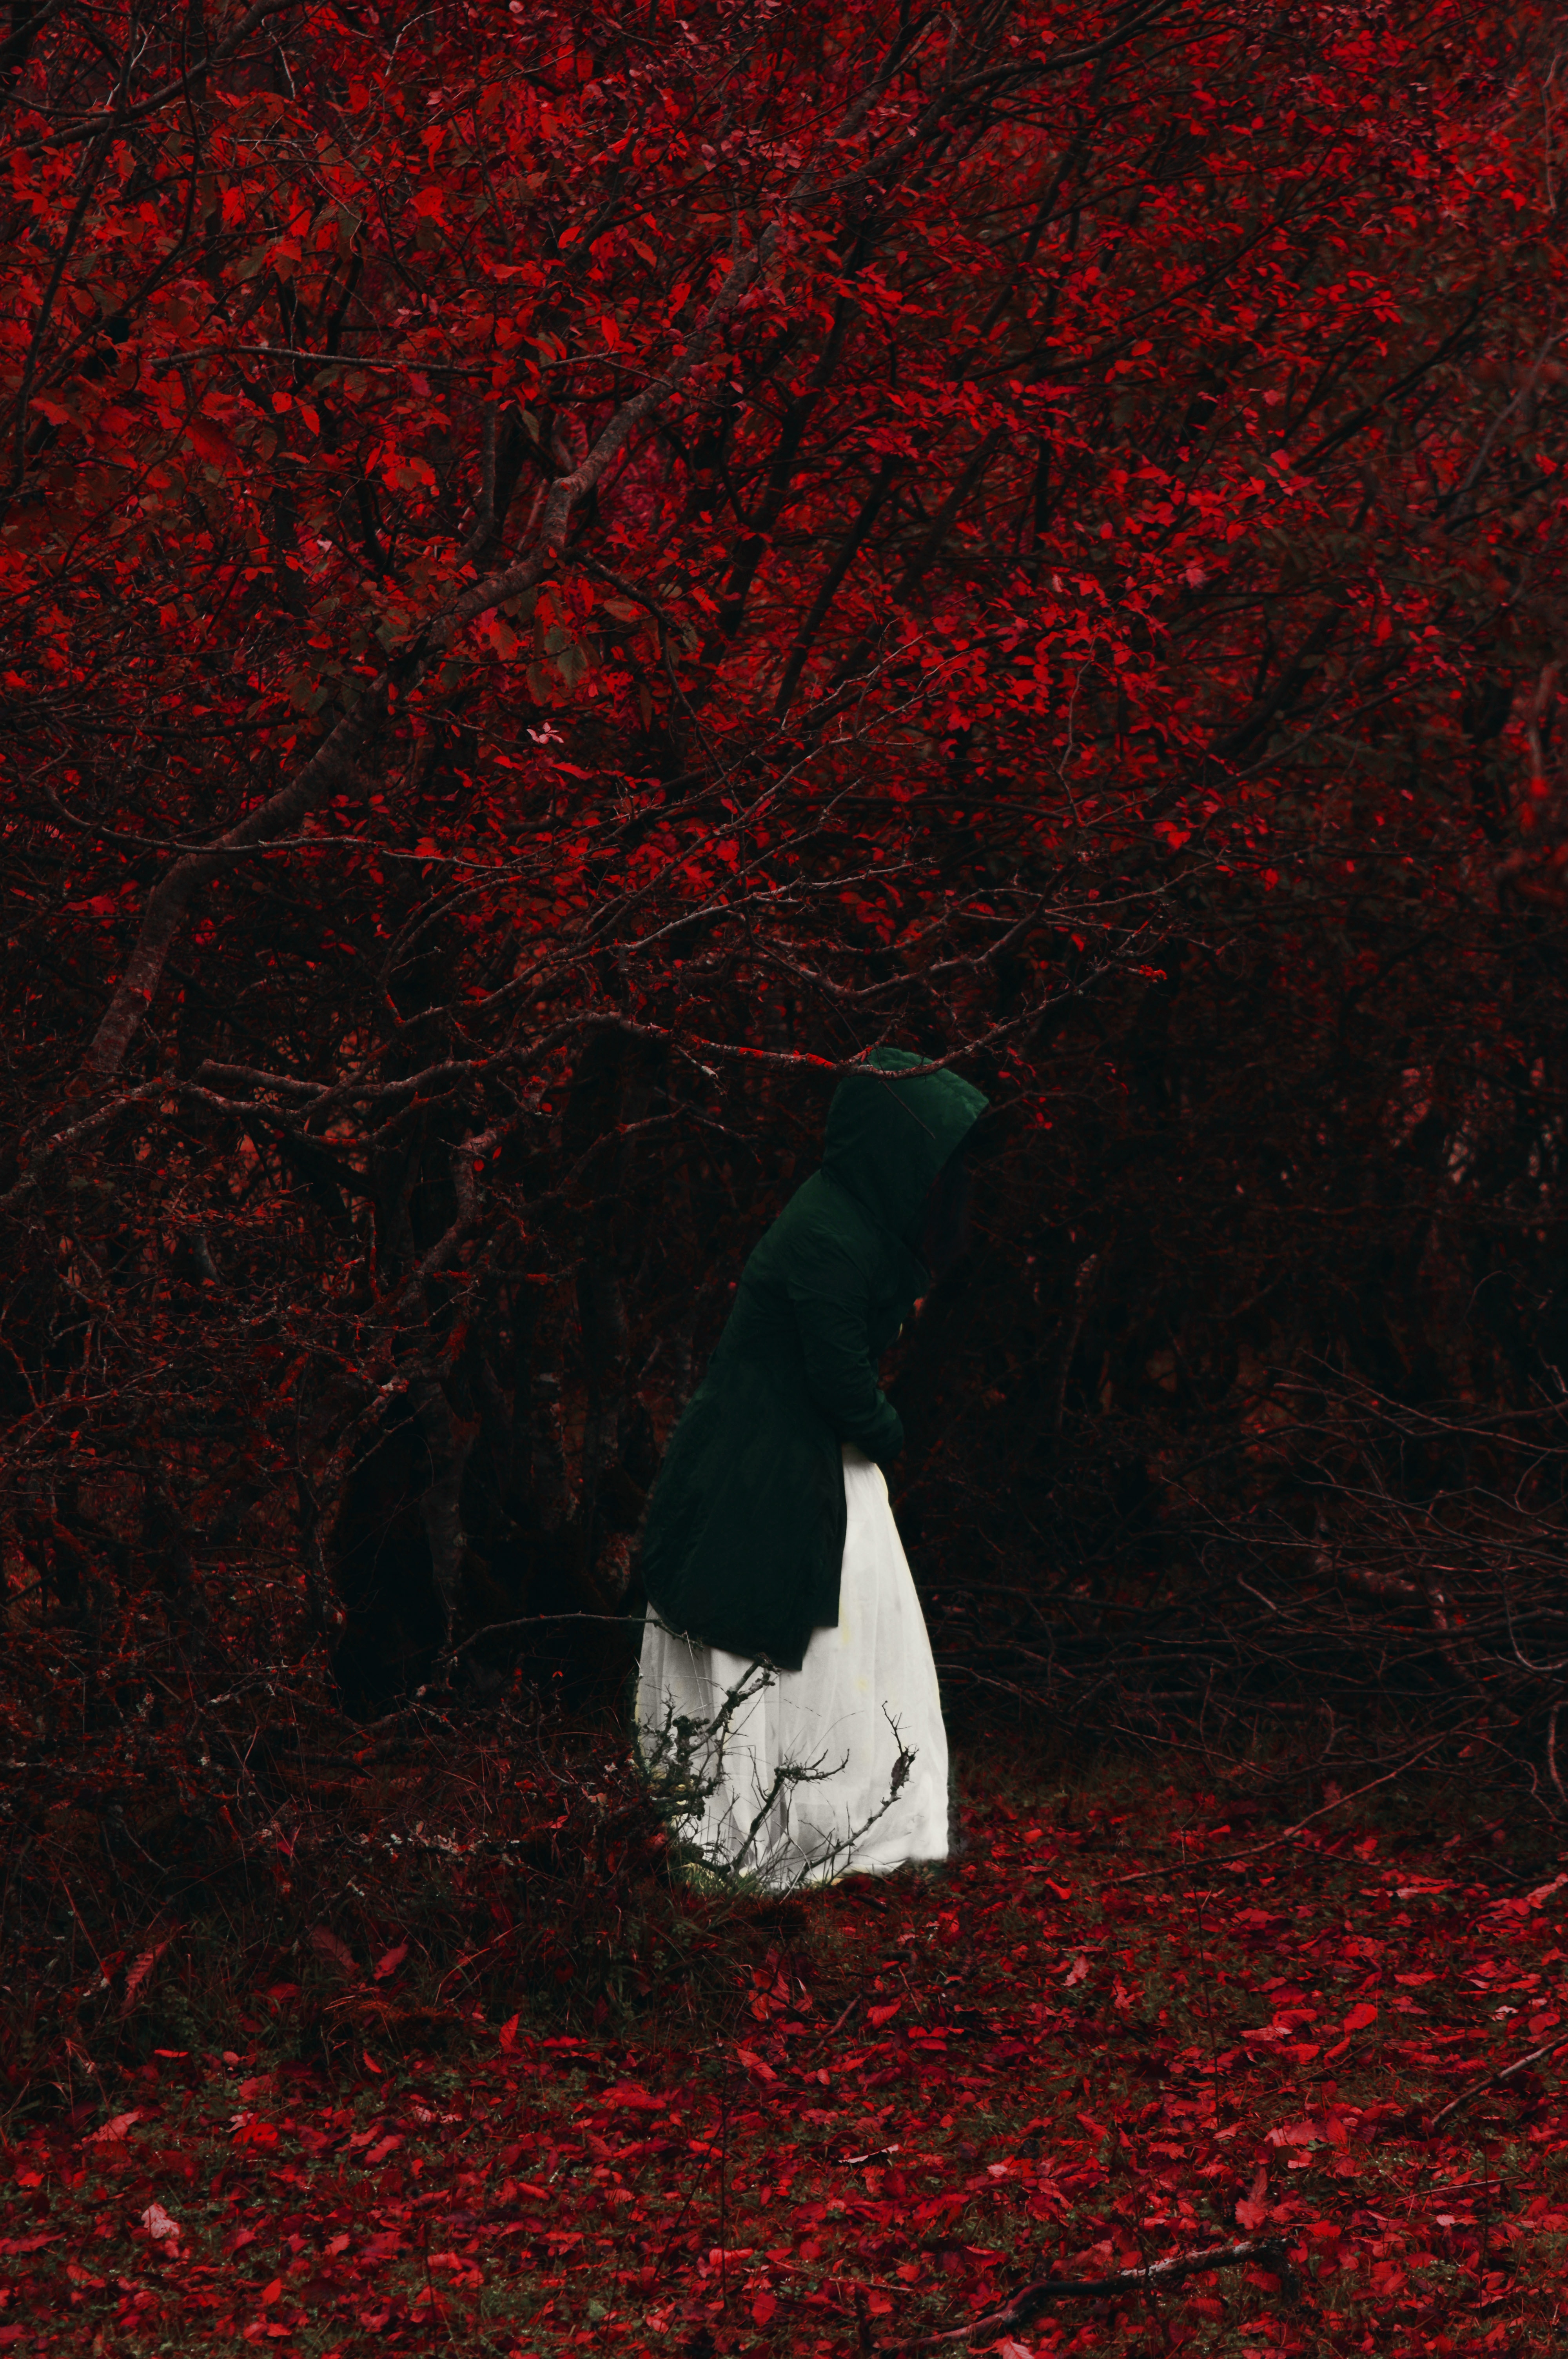 foliage, alone, autumn, hood, nature, red, forest, human, person, loneliness, lonely